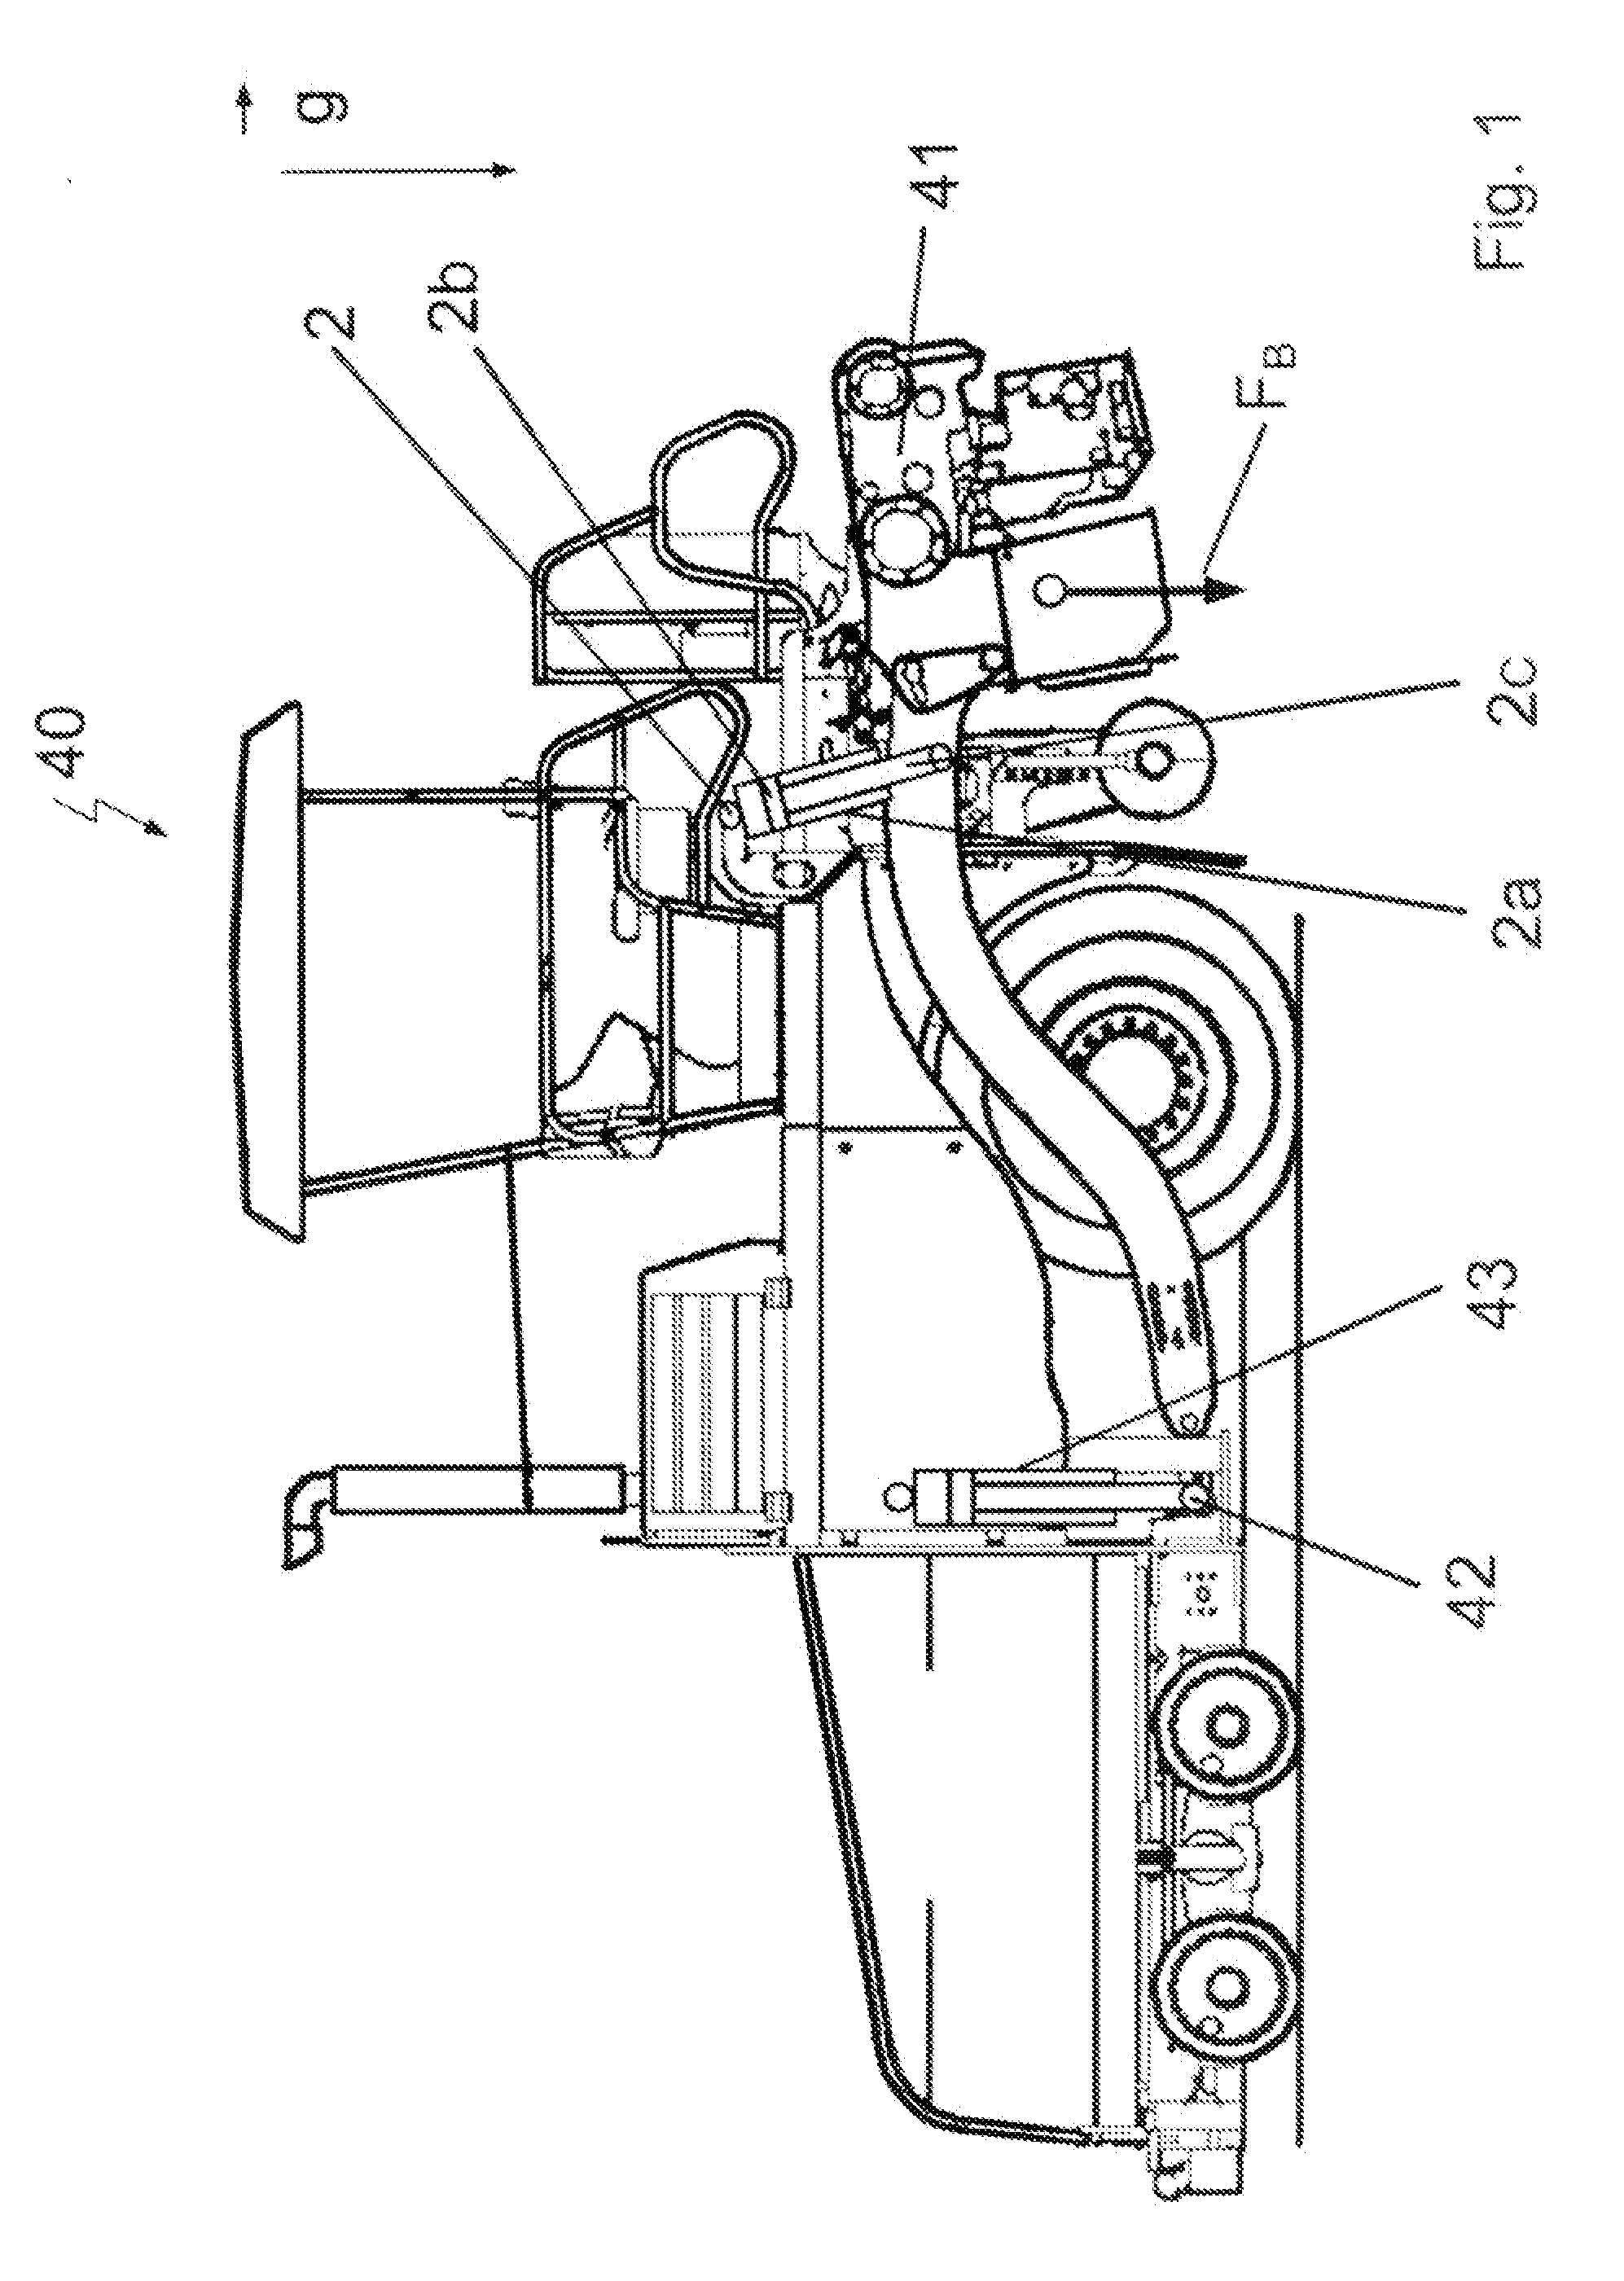 Hydraulic Control Arrangement for the Screed of a Road Finisher